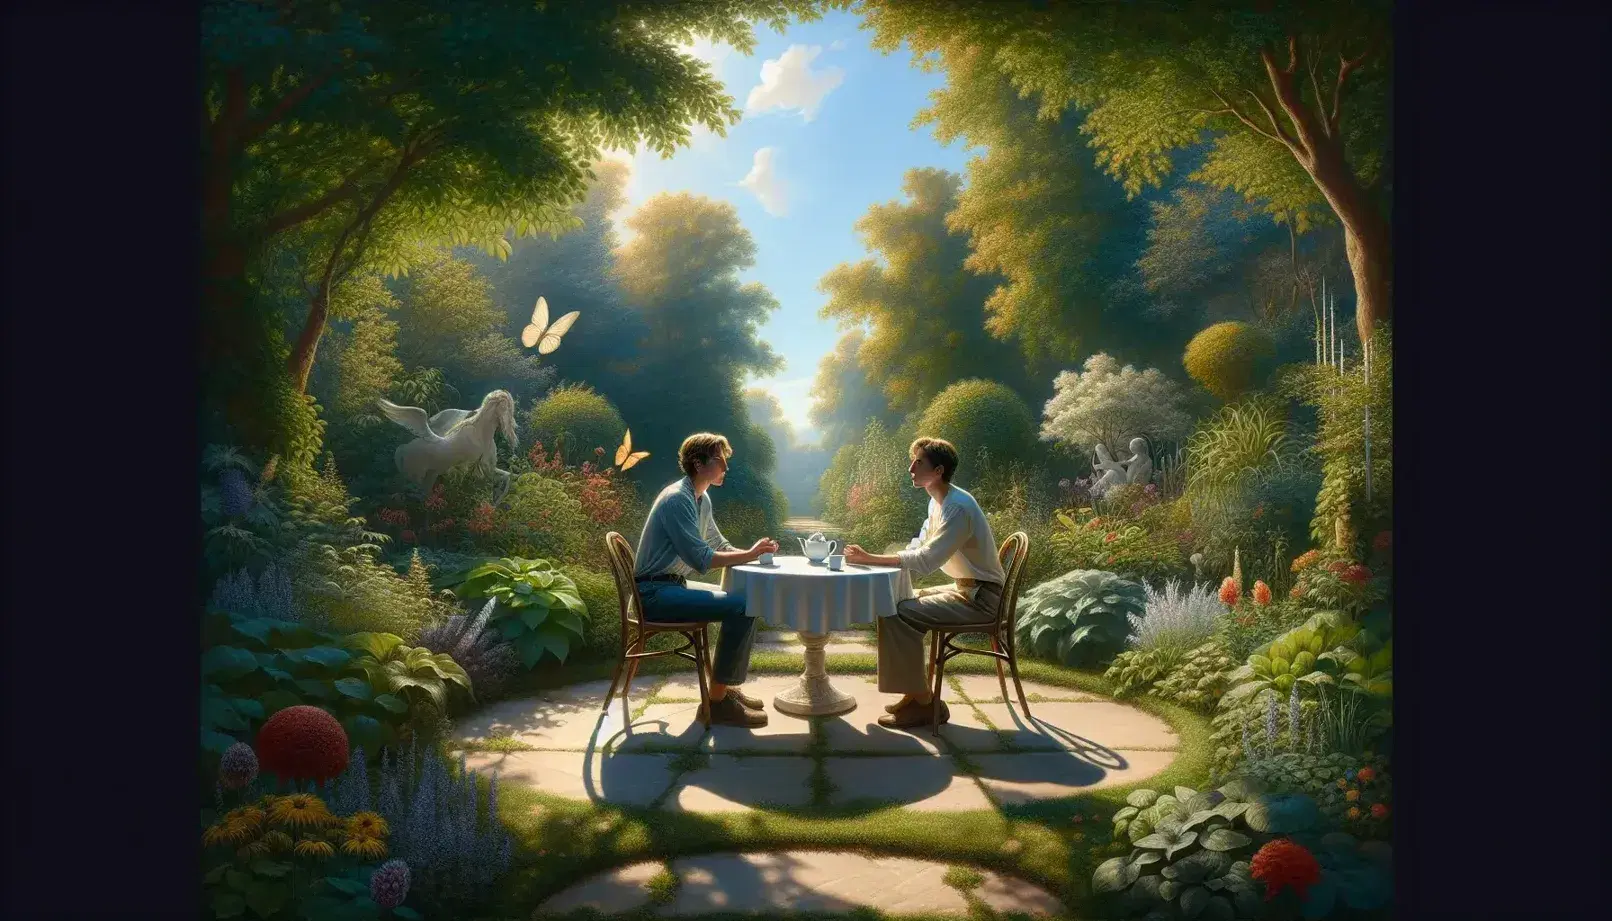 Two people engaged in conversation at a garden table surrounded by lush plants and colorful flowers, with sunlight casting shadows.